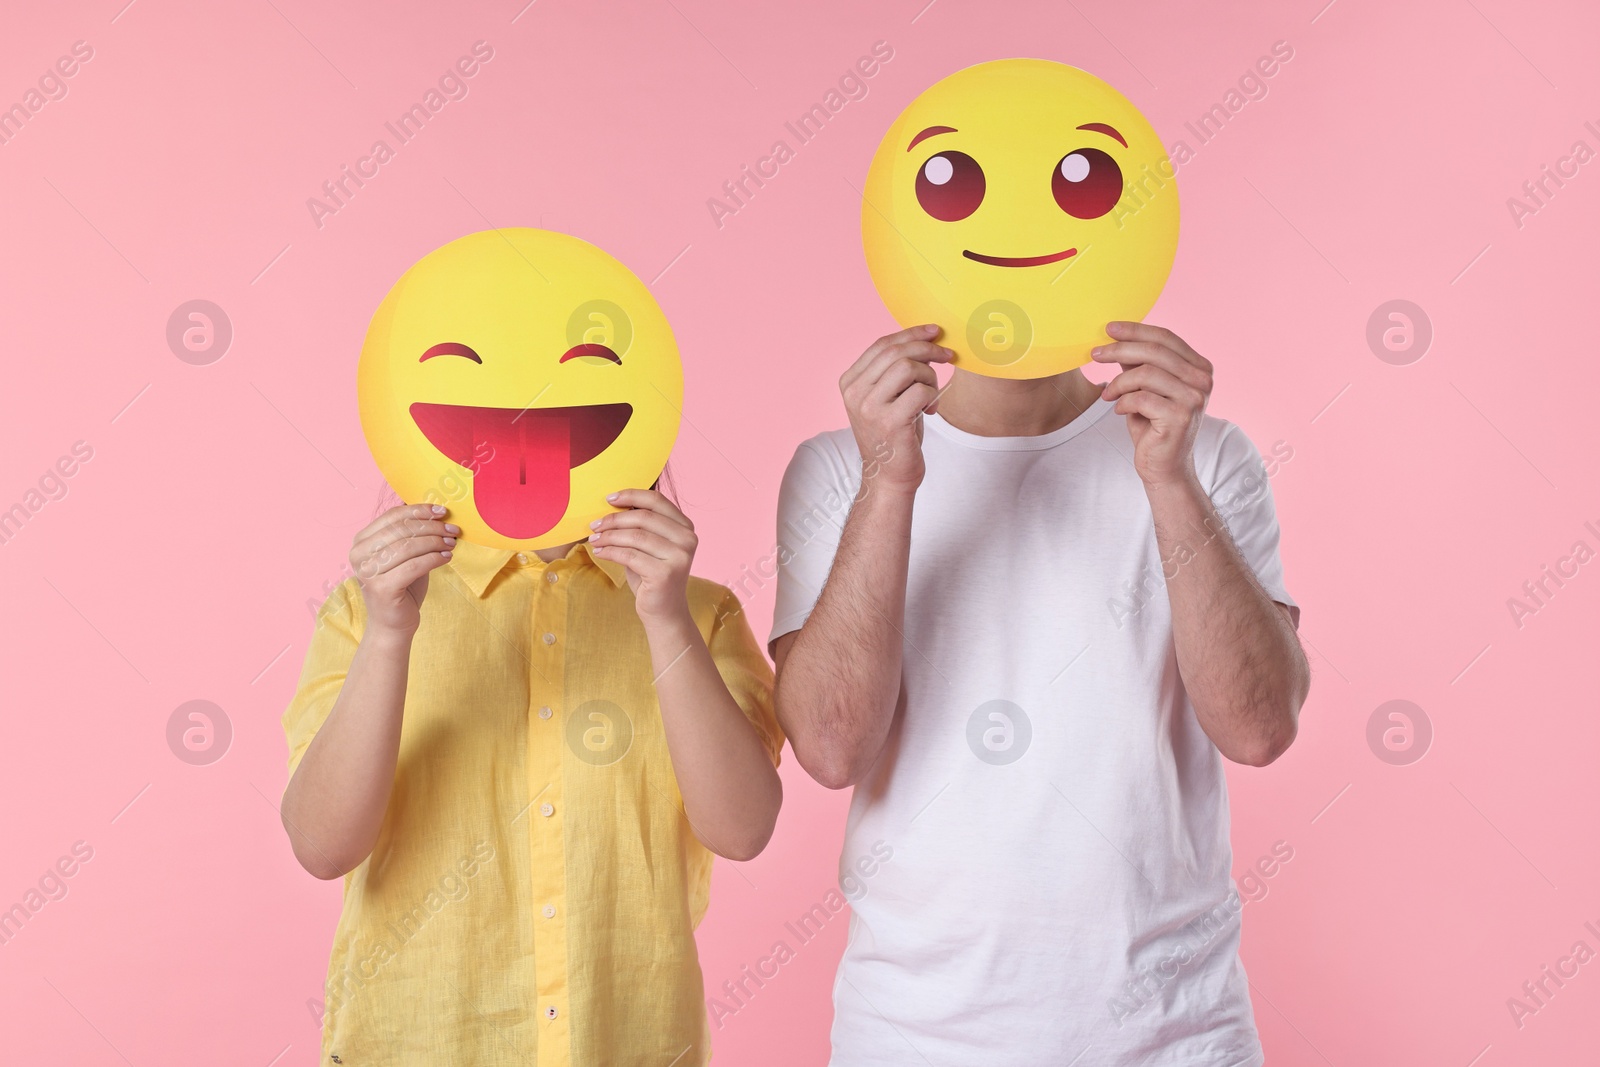 Photo of People covering faces with emoticons on pink background